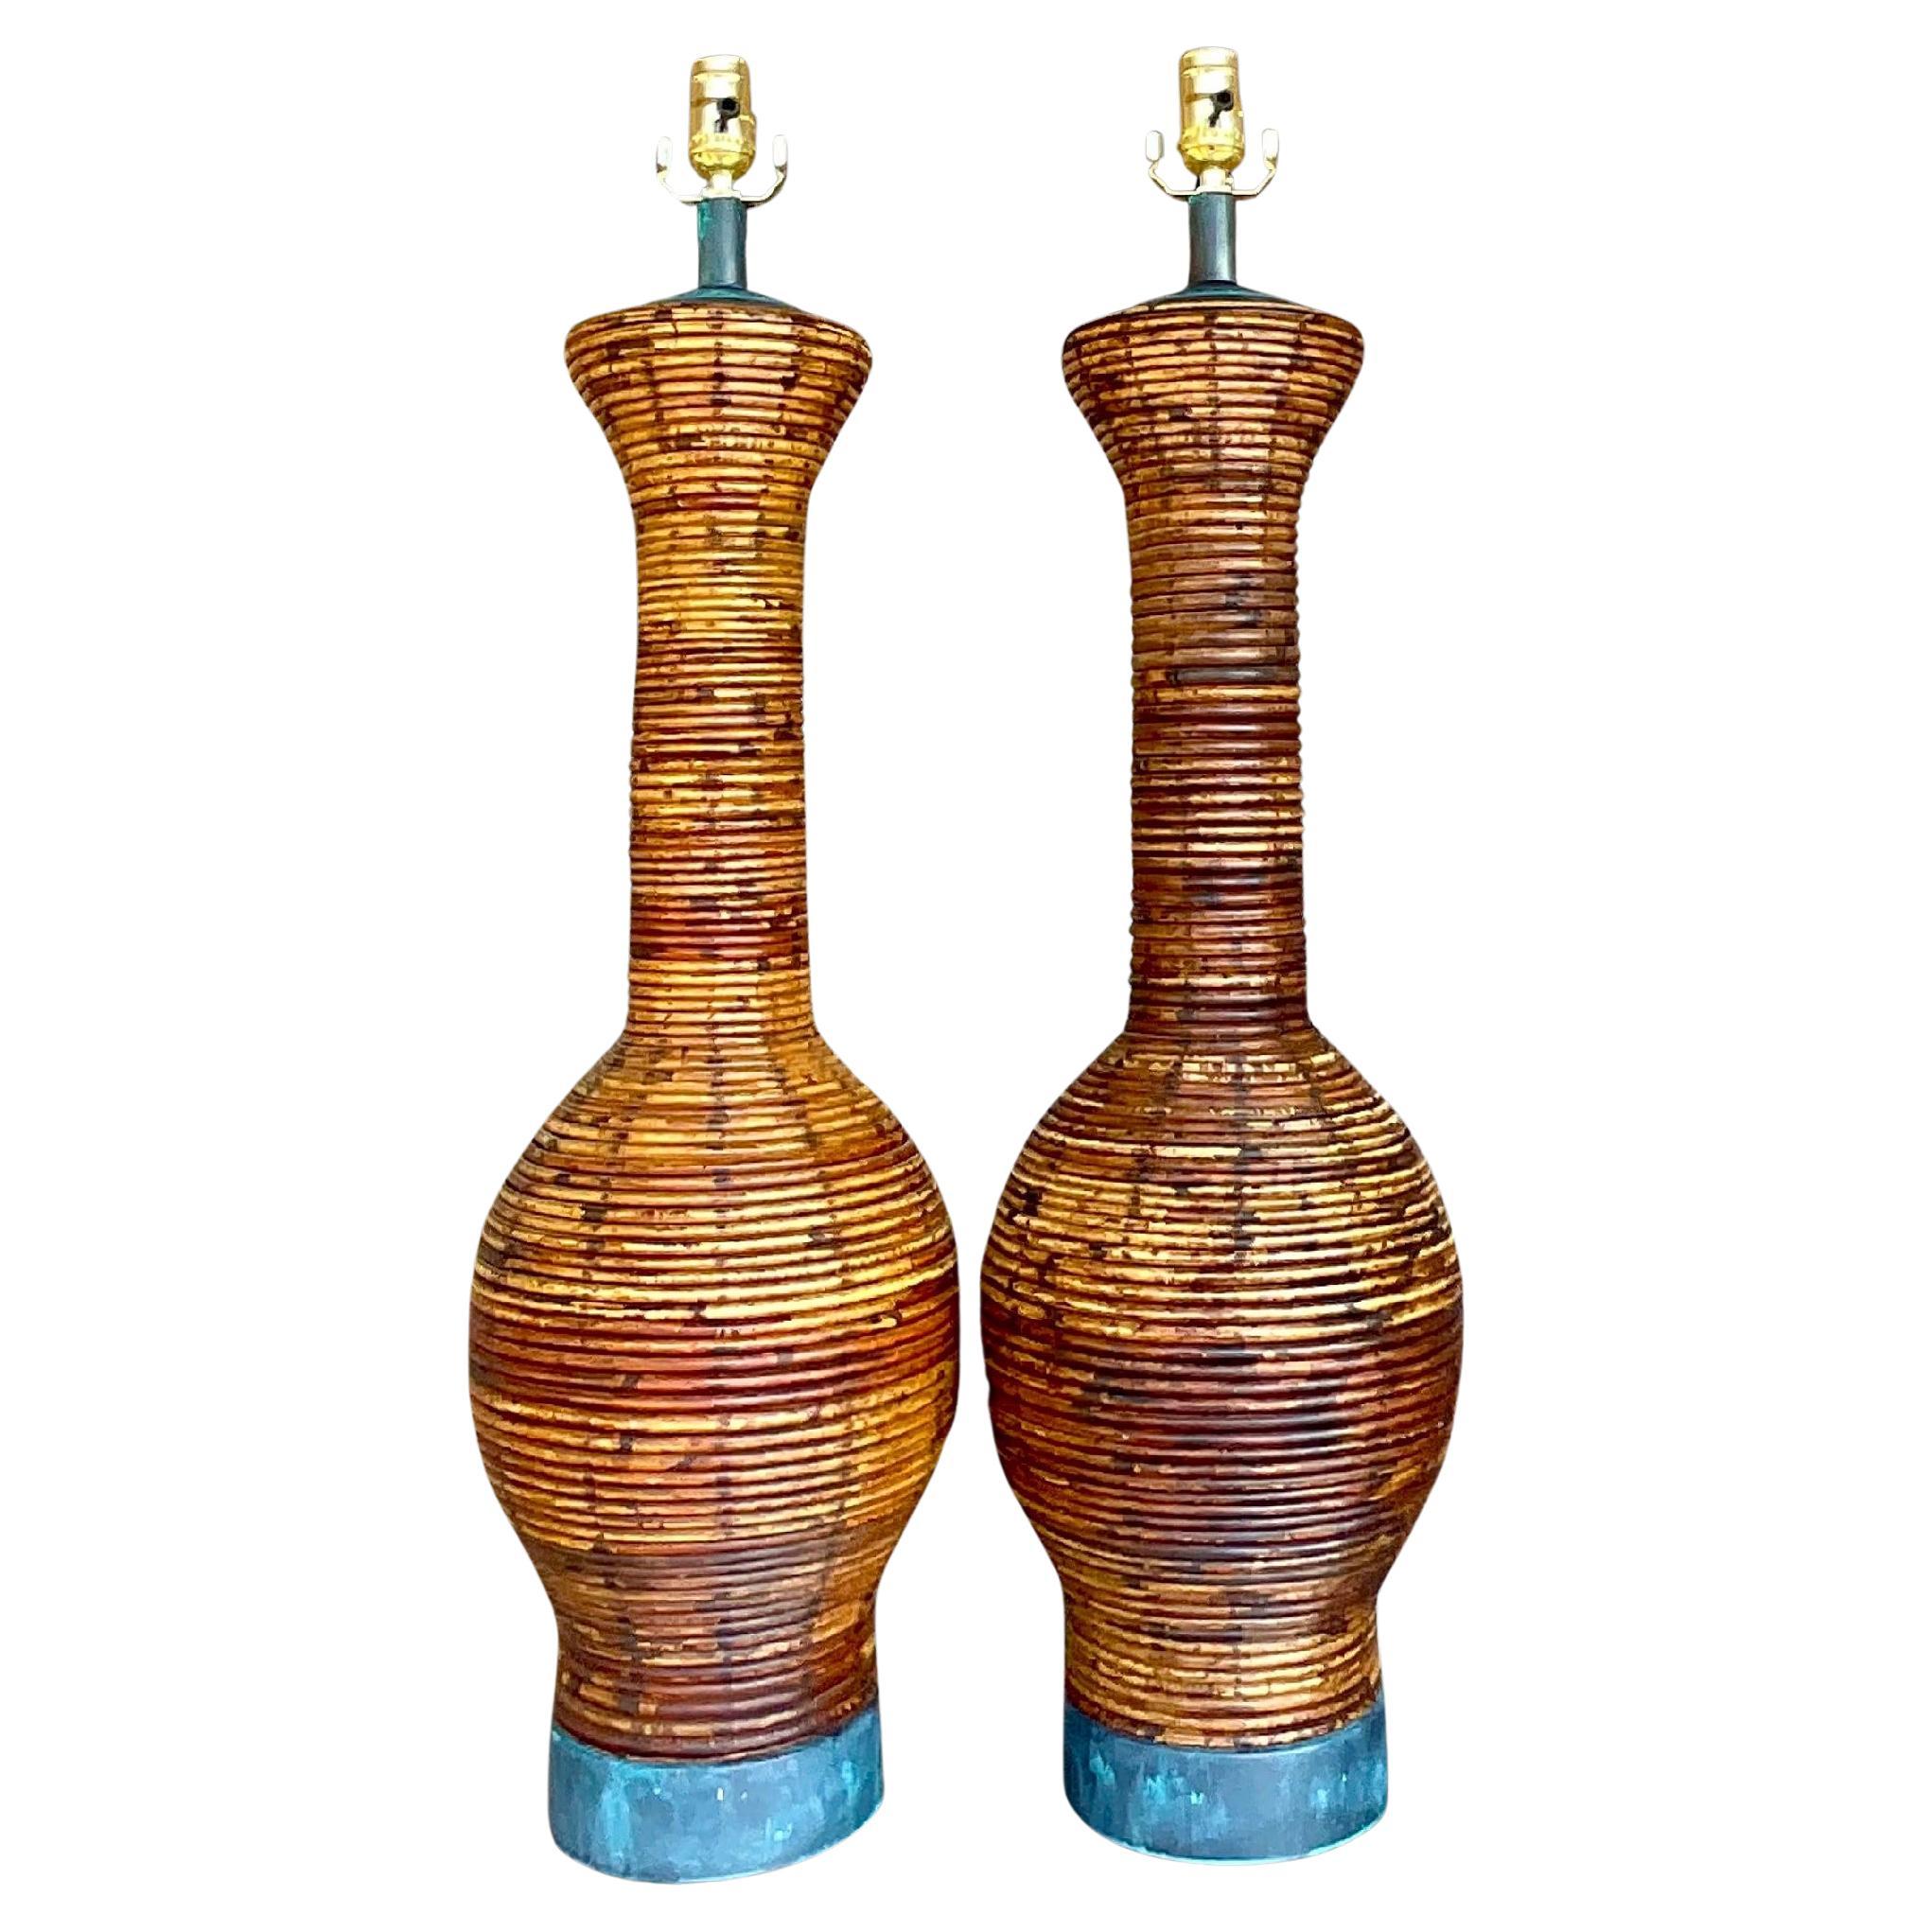 Vintage Coastal Pencil Reed Lamps With Patinated Bronze Hardware - a Pair For Sale